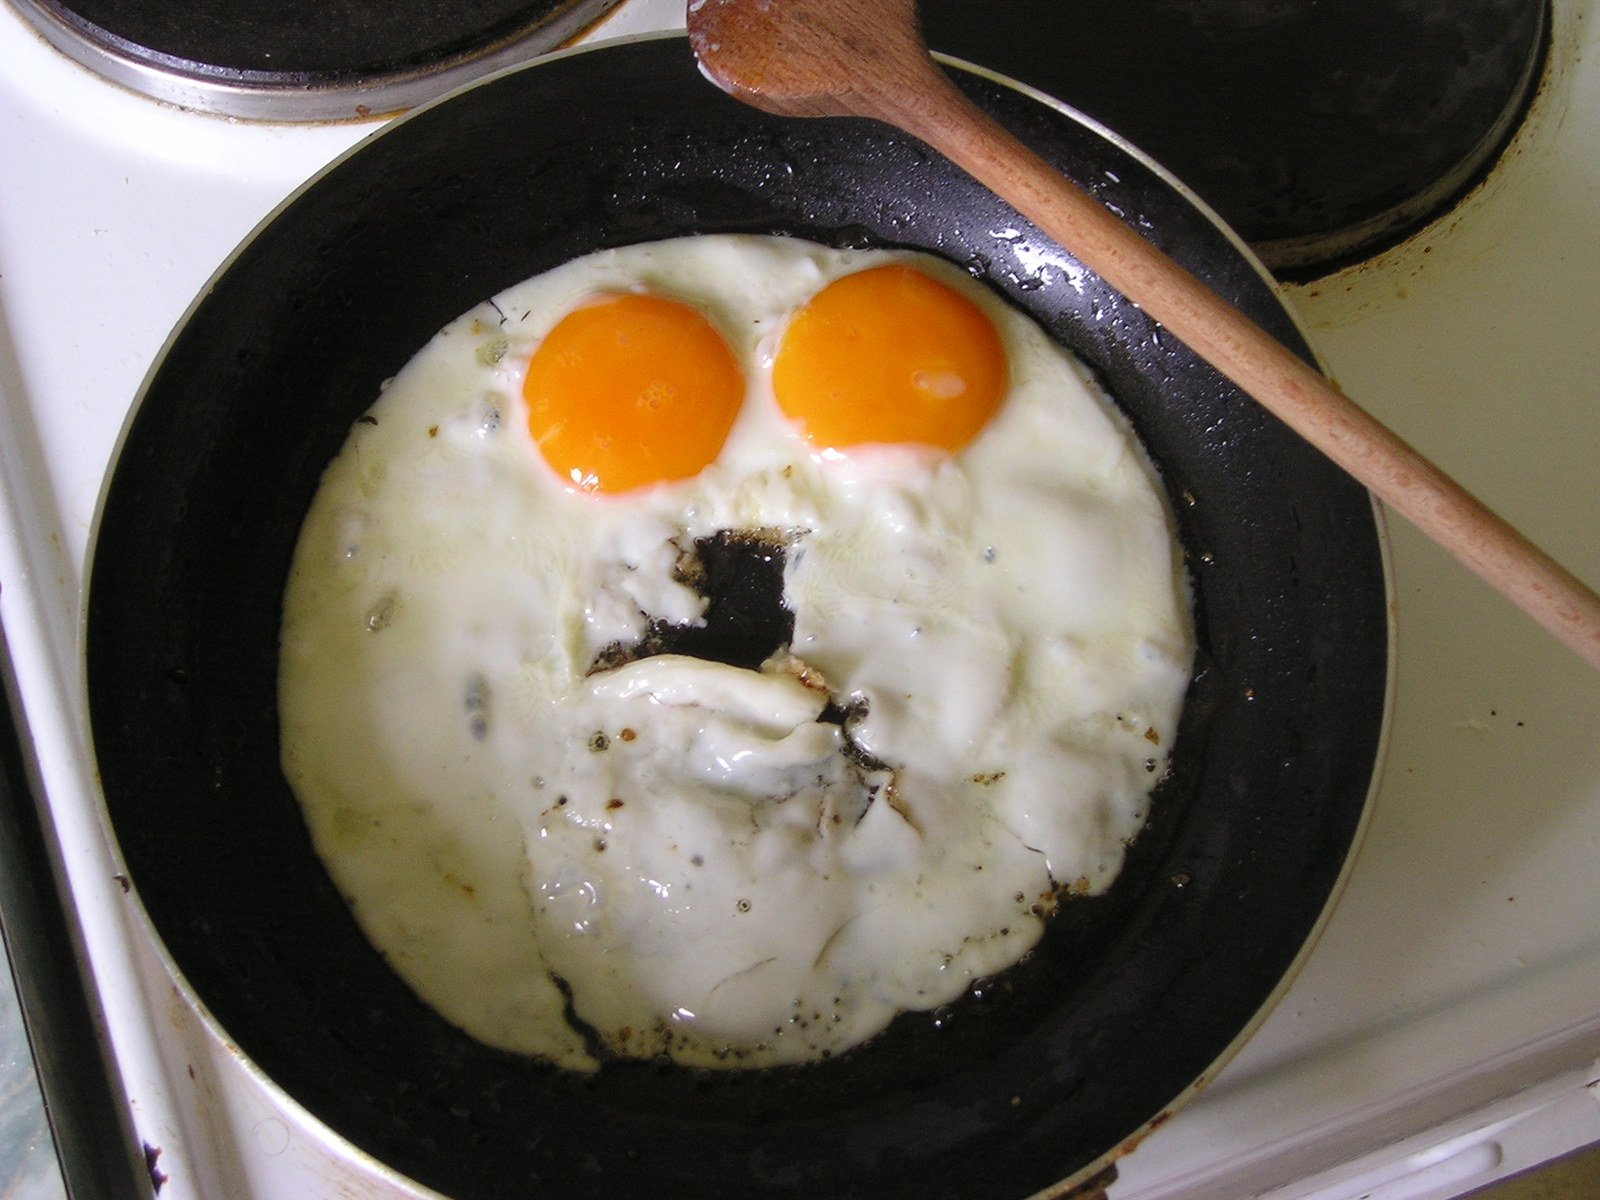 two fried eggs have faces on them in a set